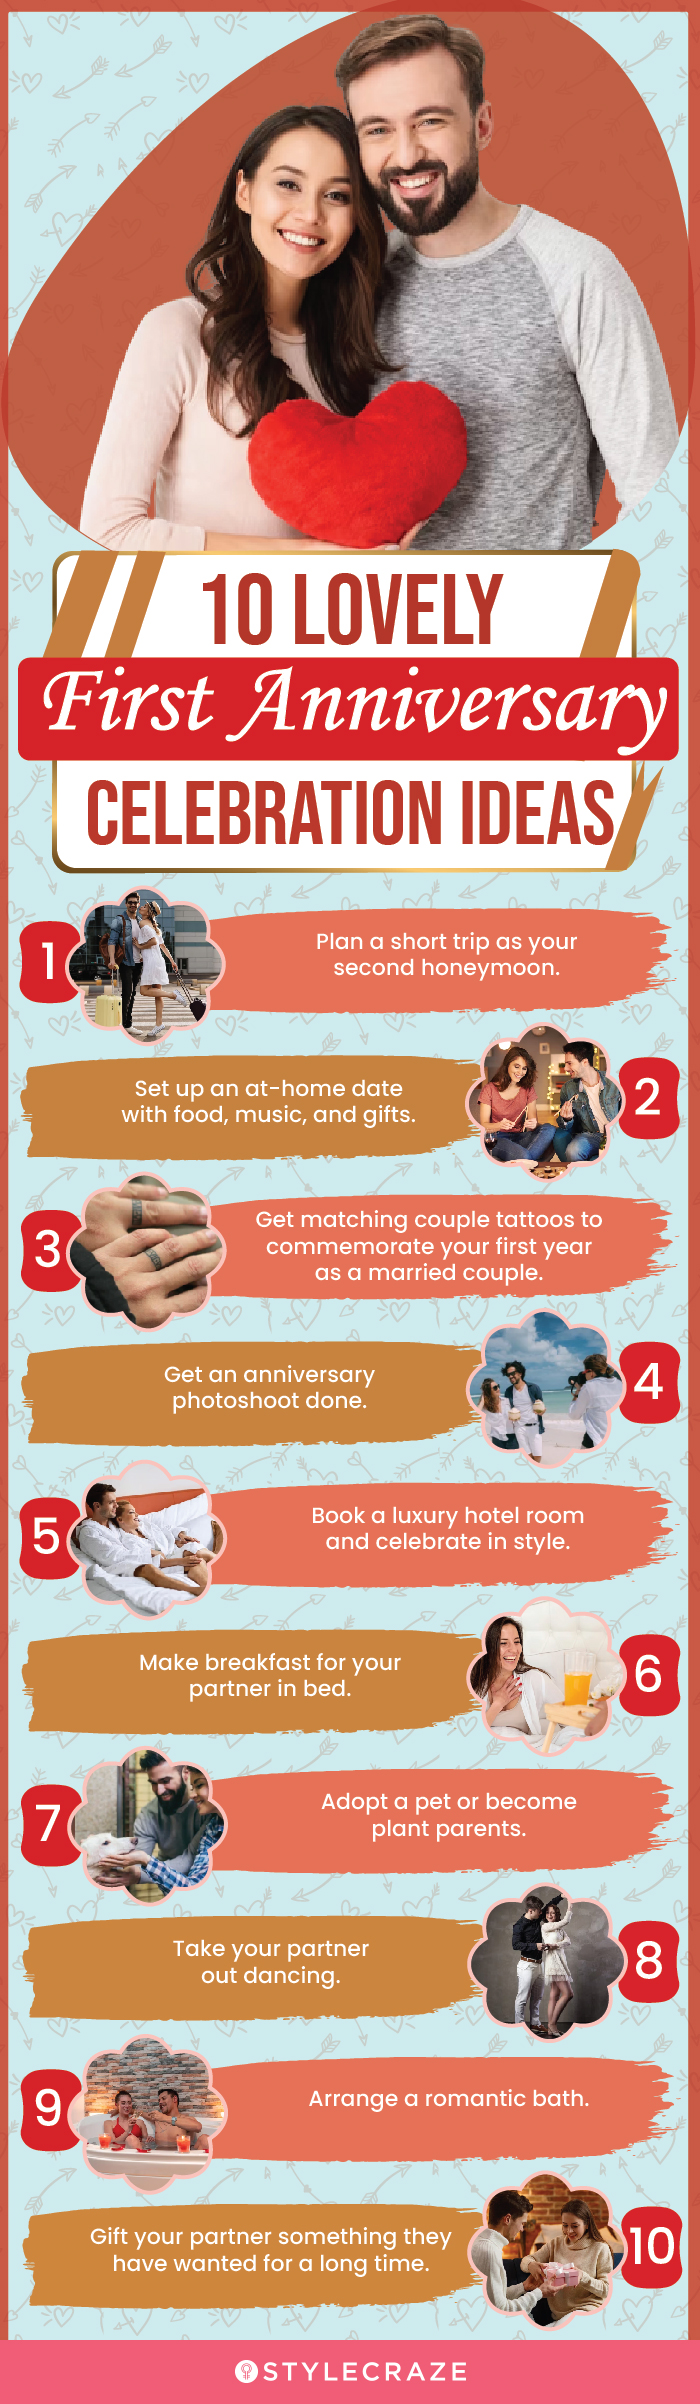 10 lovely first anniversary celebration ideas (infographic)